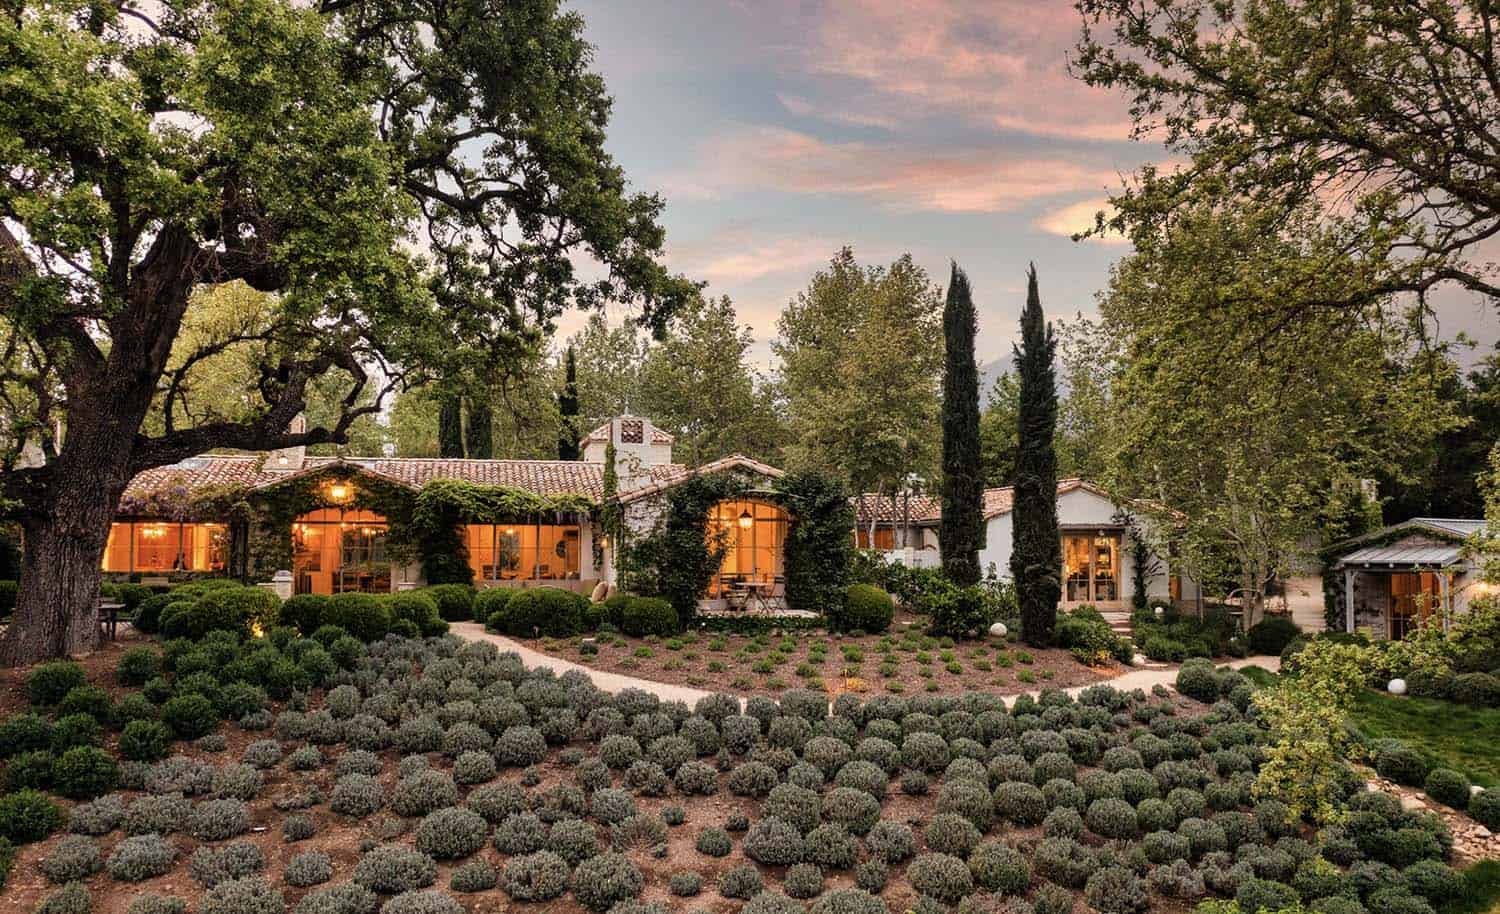 European-inspired country home exterior at dusk